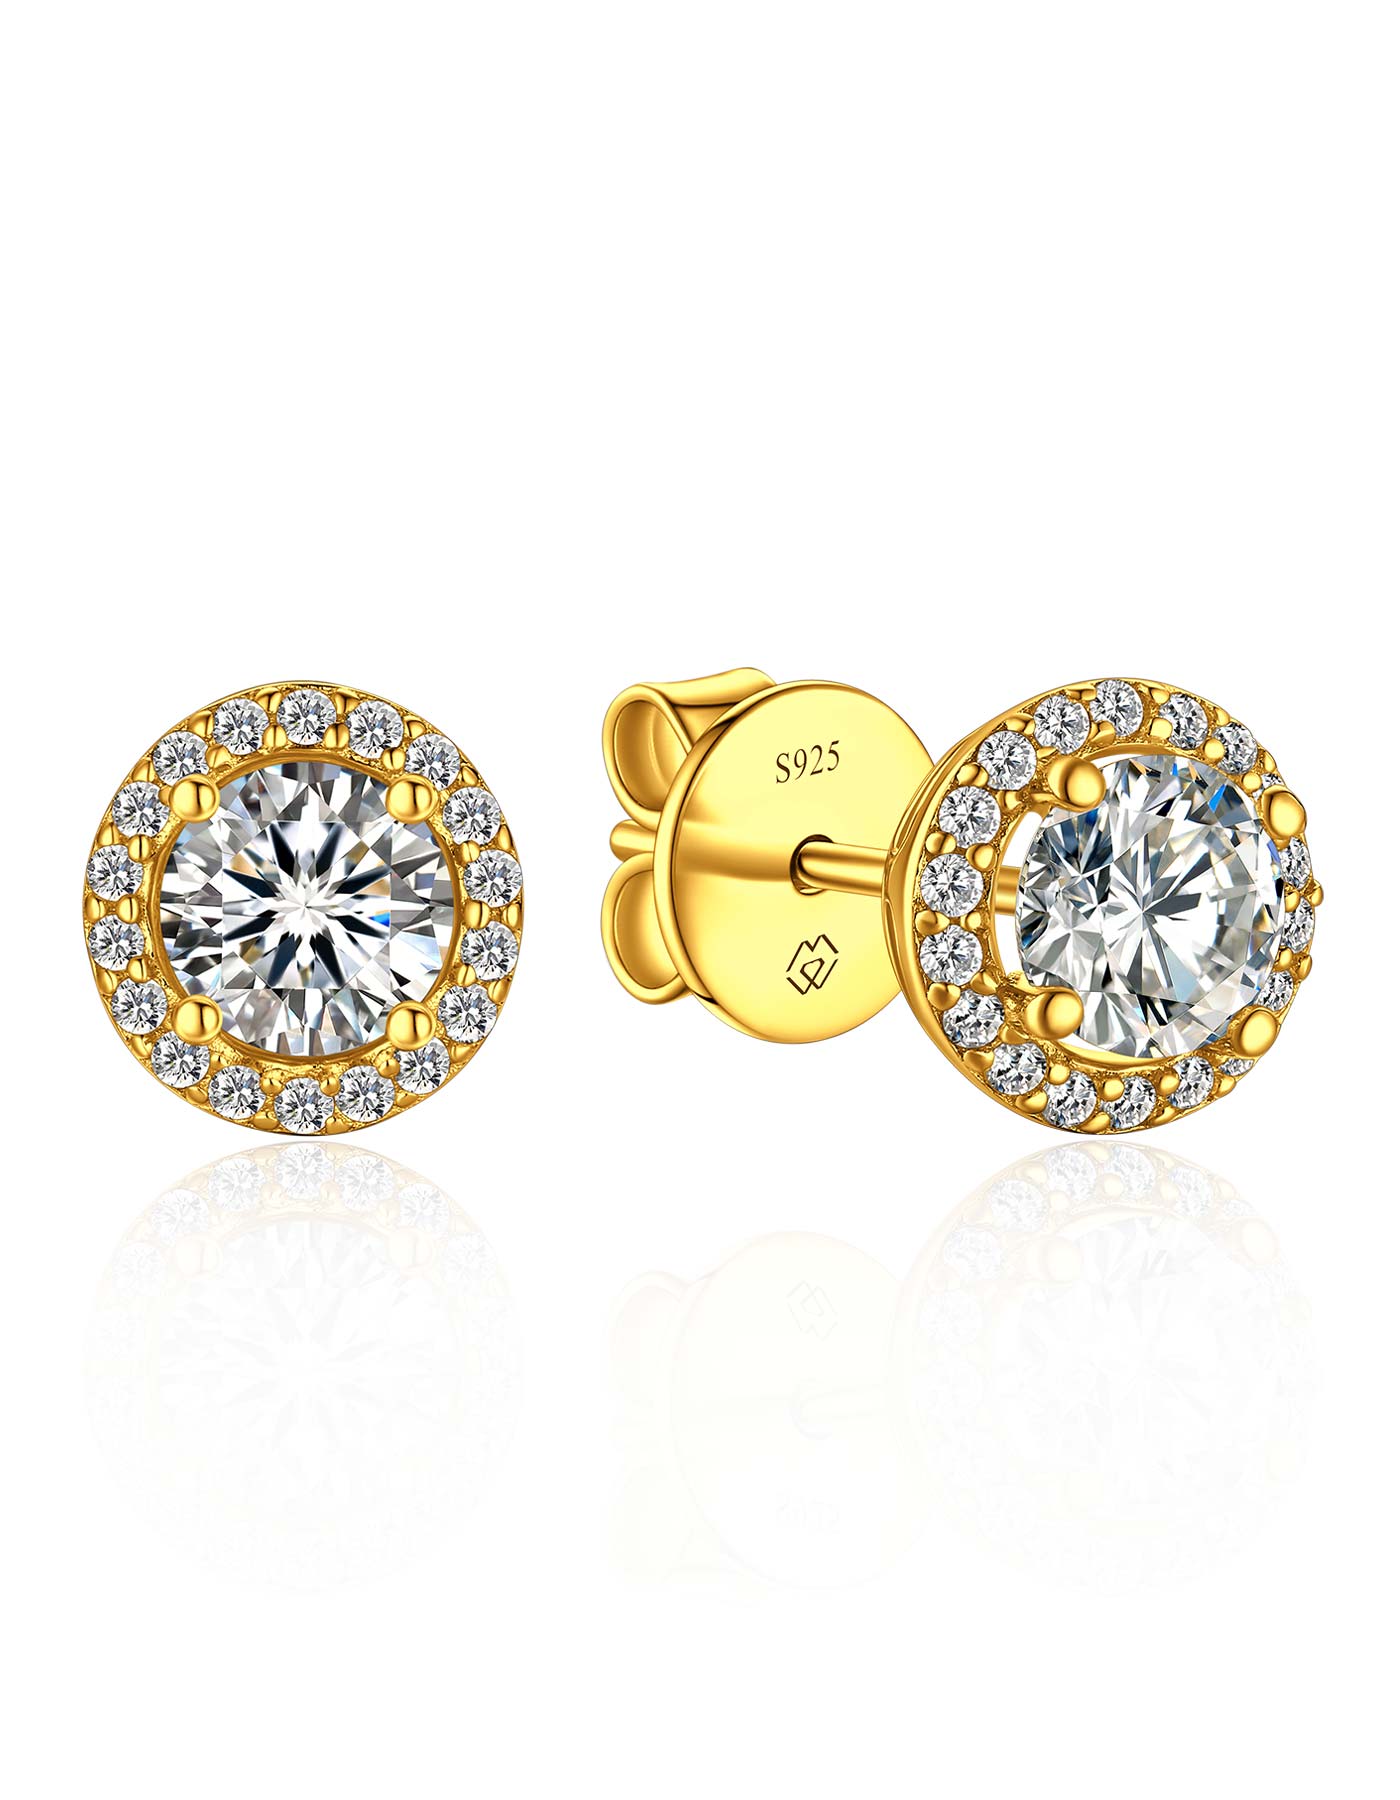 MomentWish Gold Plated Halo Moissanite Stud Earrings for Women